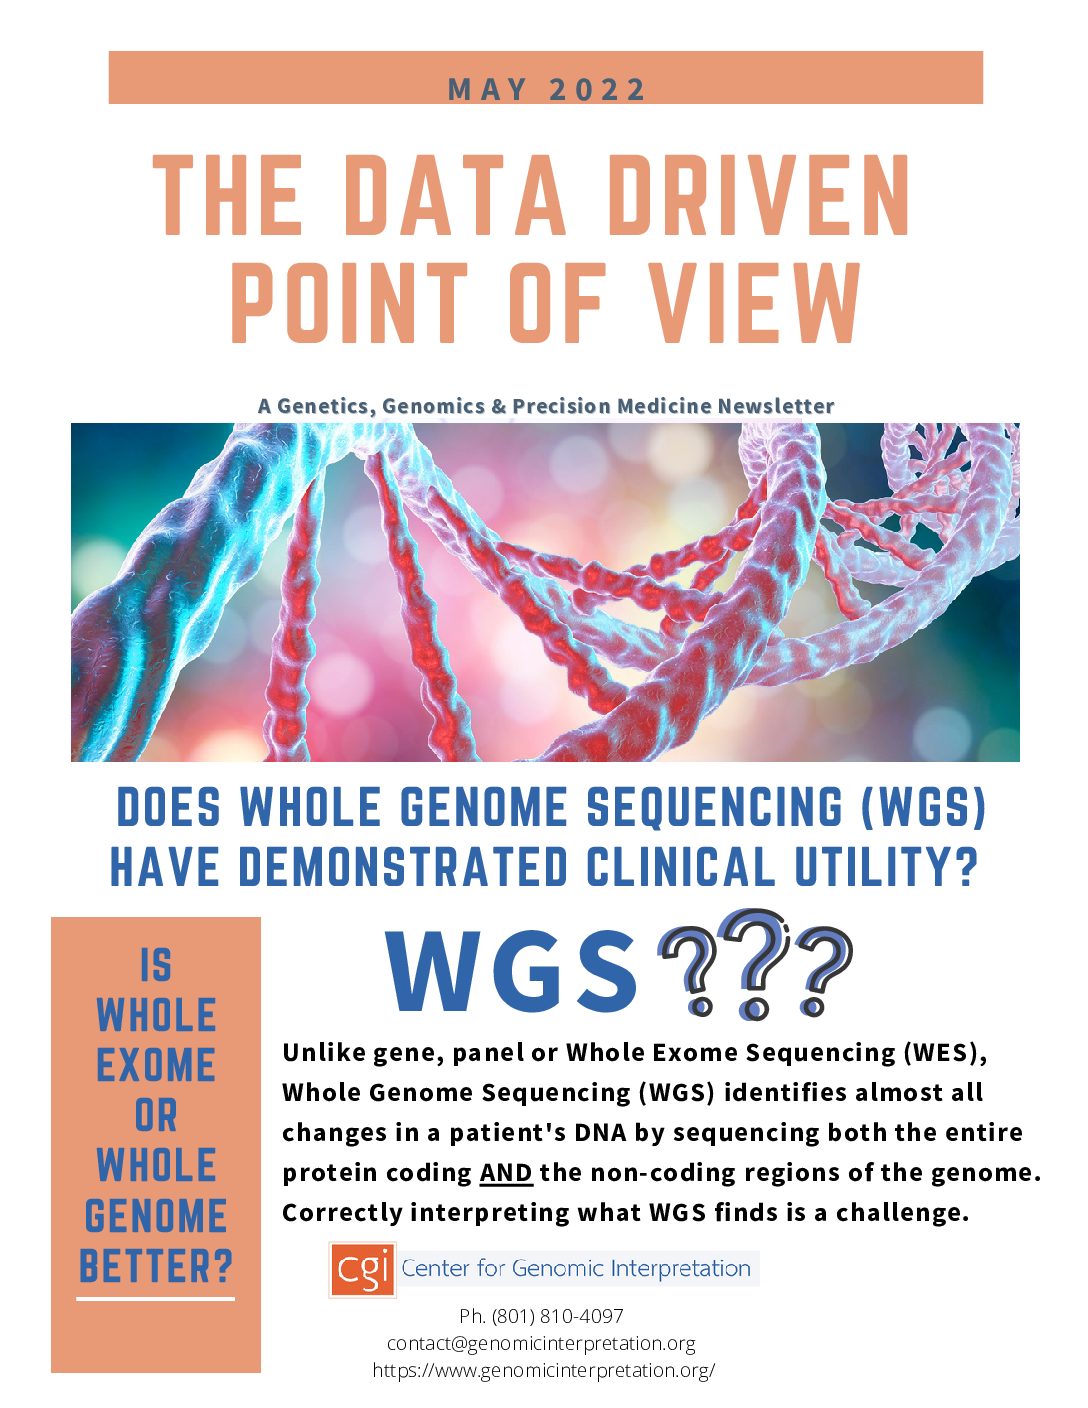 May 2022 – The Data Driven Point of View Newsletter:  Is Whole Exome or Whole Genome Sequencing Better?